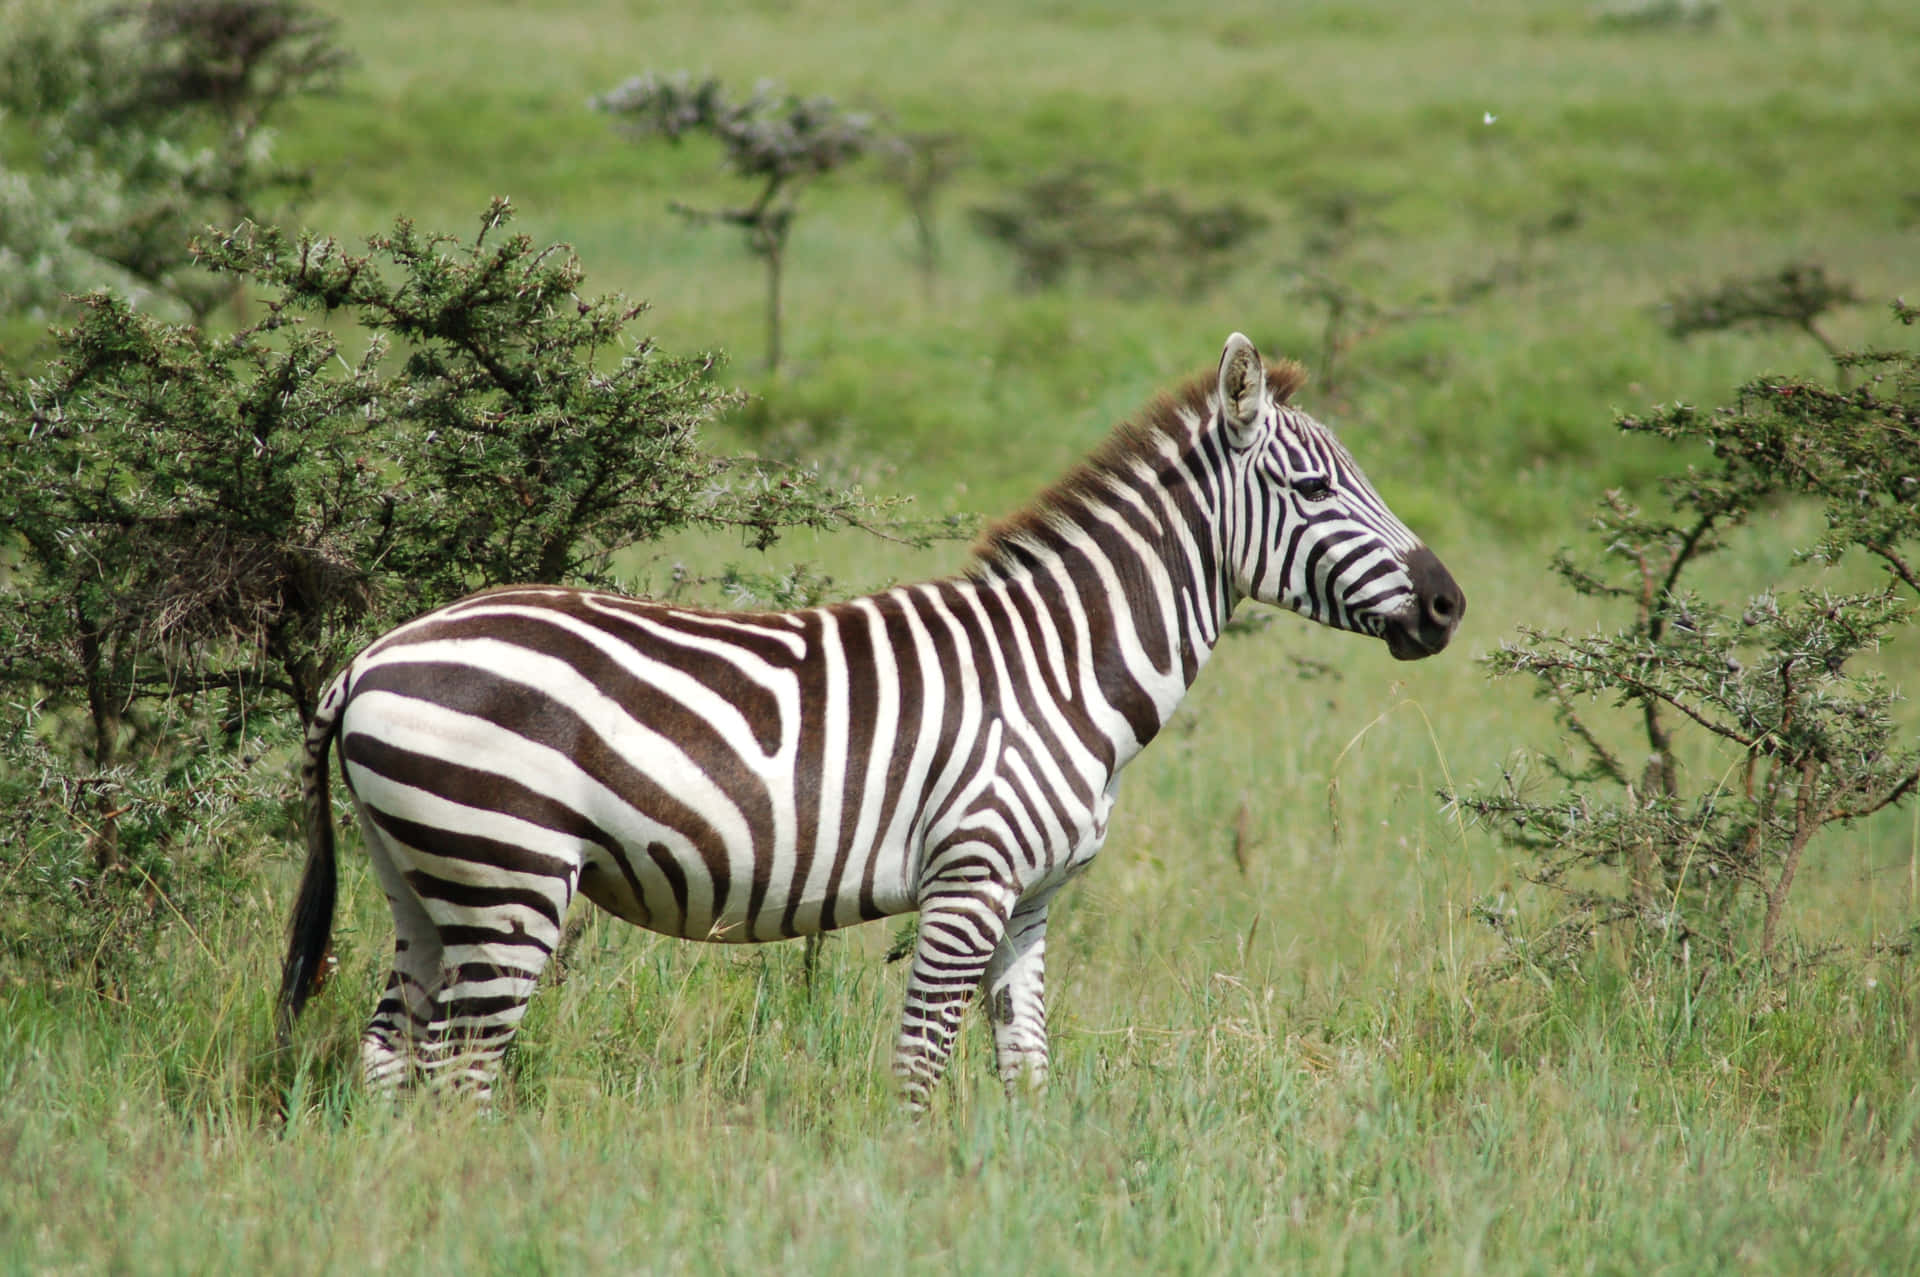 A Zebra stands out against a background of green grass.